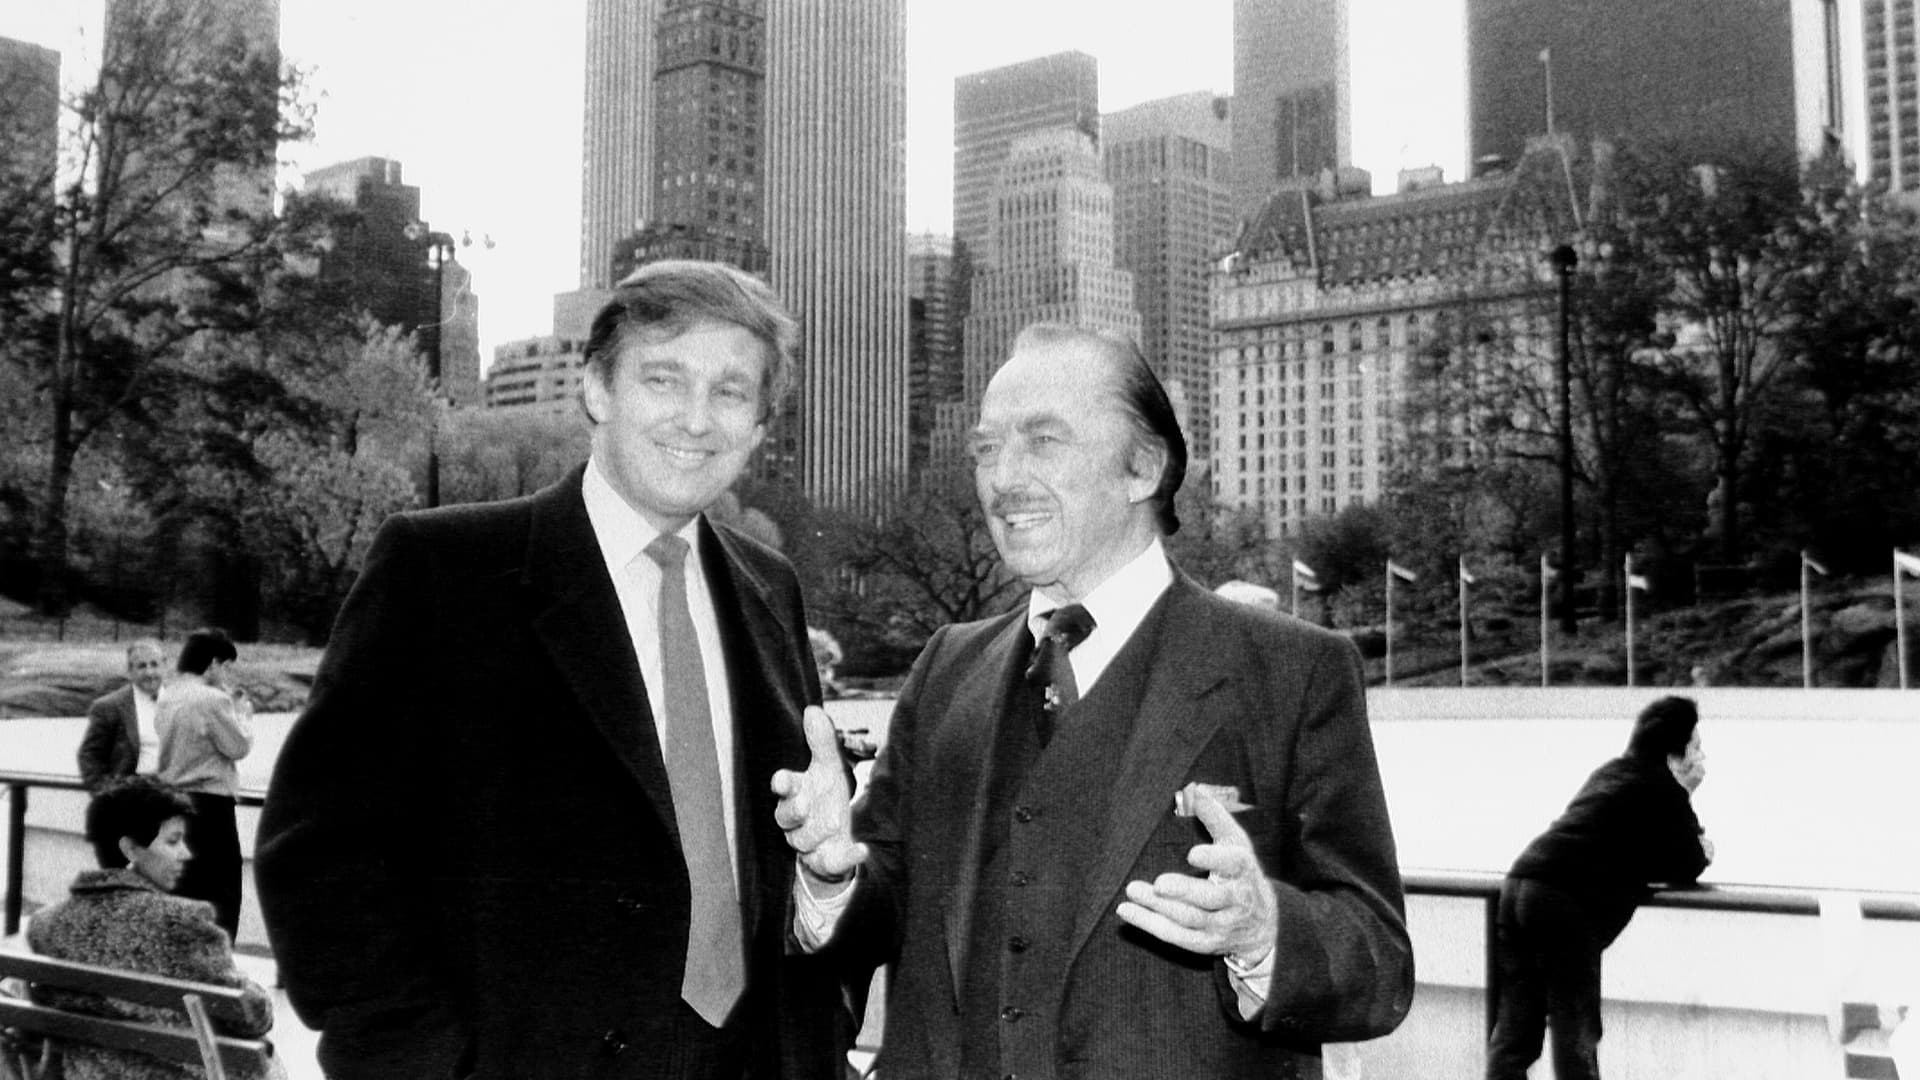 Donald Trump and his father, Fred Trump, at the opening of Wollman Rink in Manhattan's Central Park in 1987.